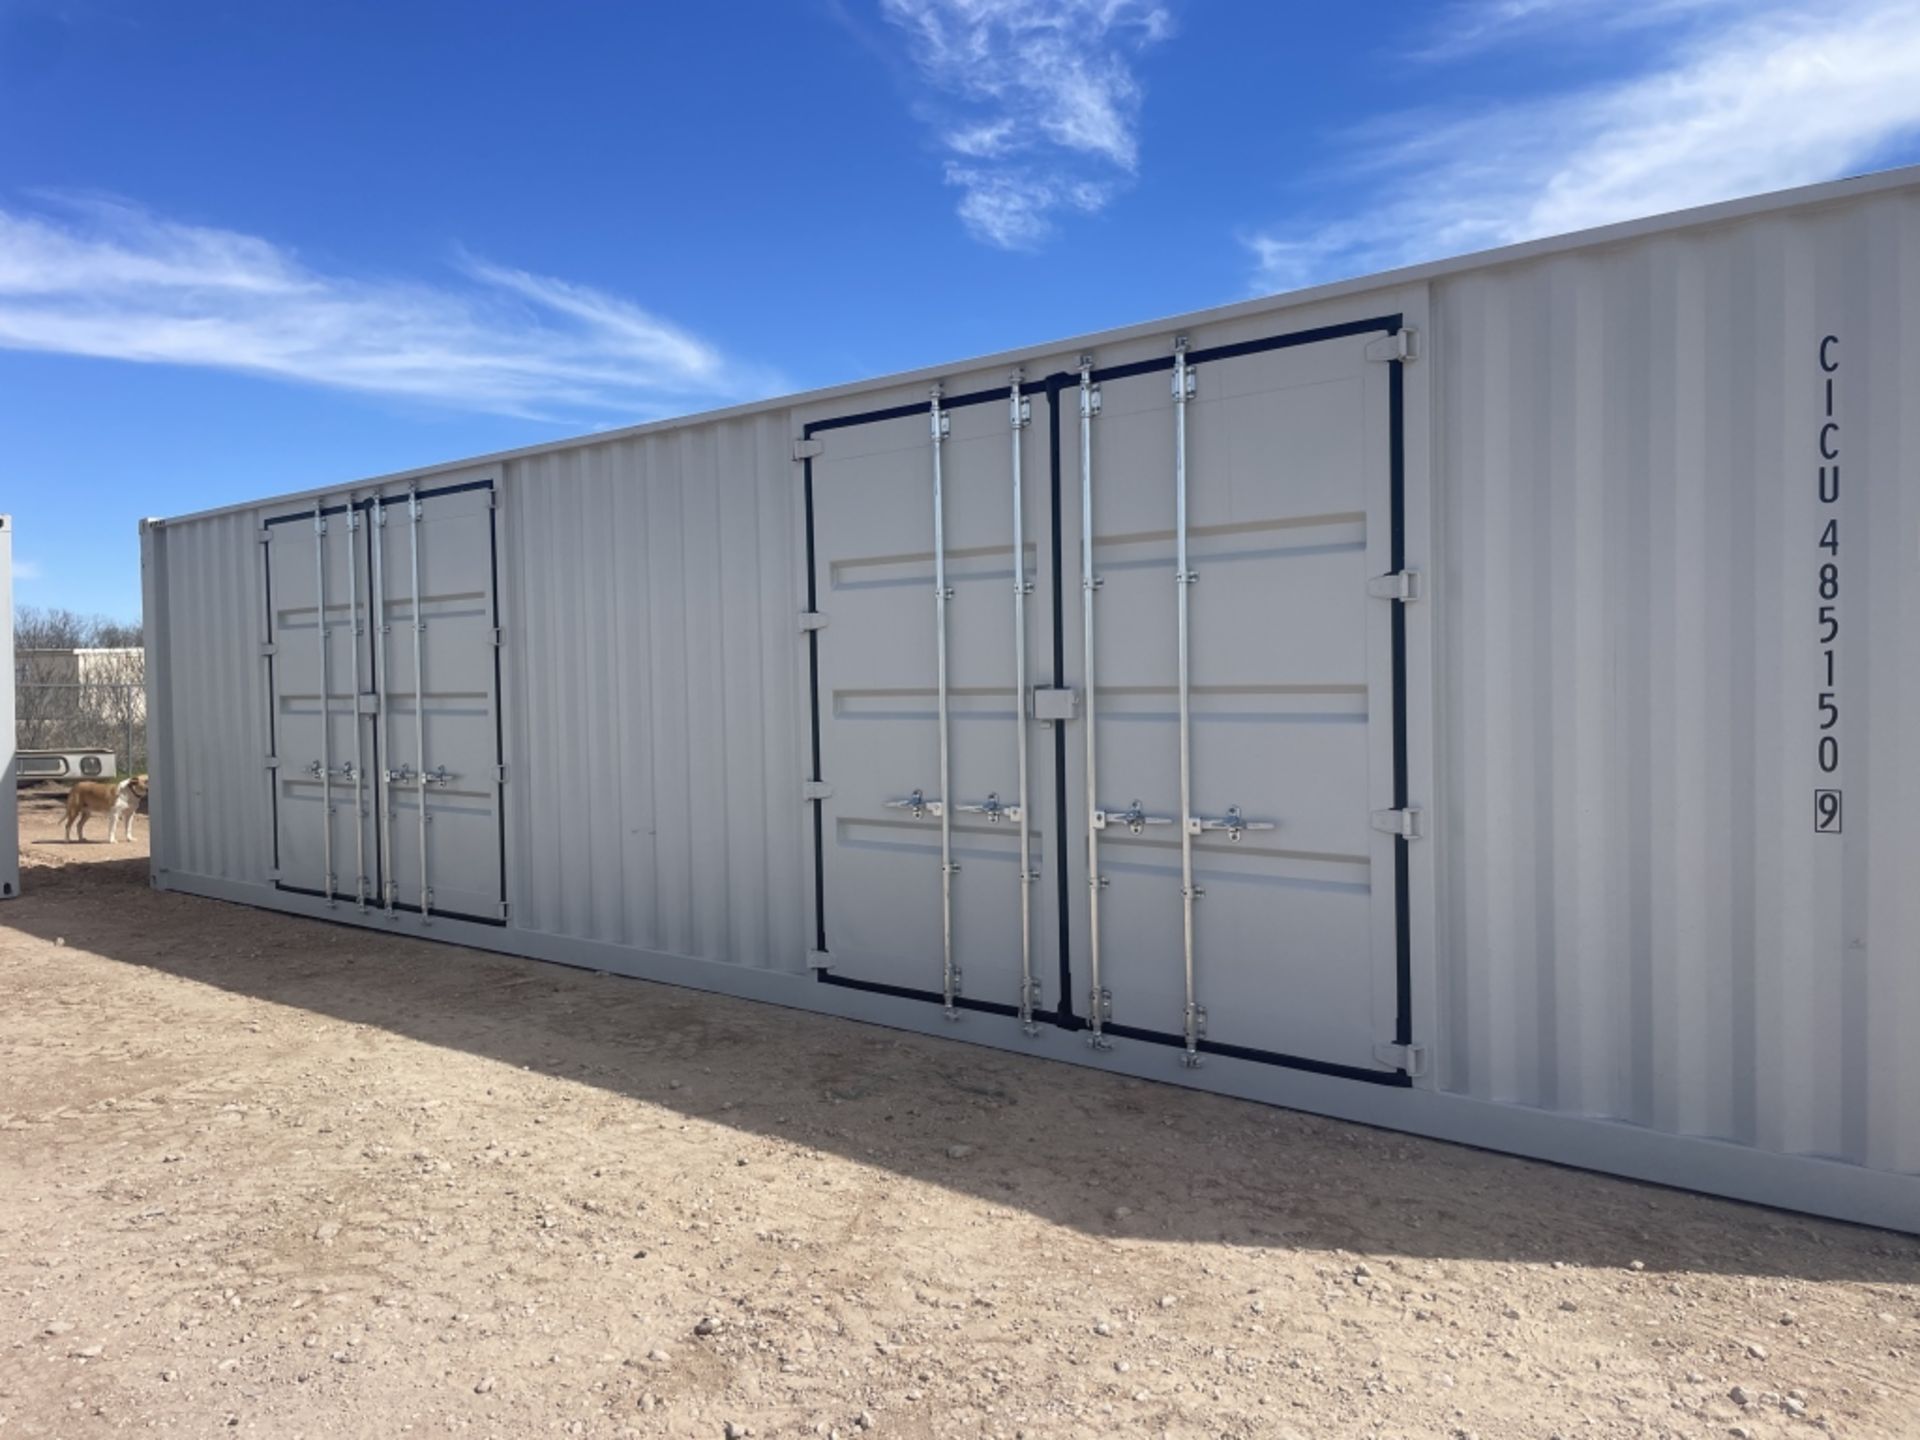 40’ one trip container w/2 side doors. CICU4851509 - Image 3 of 8